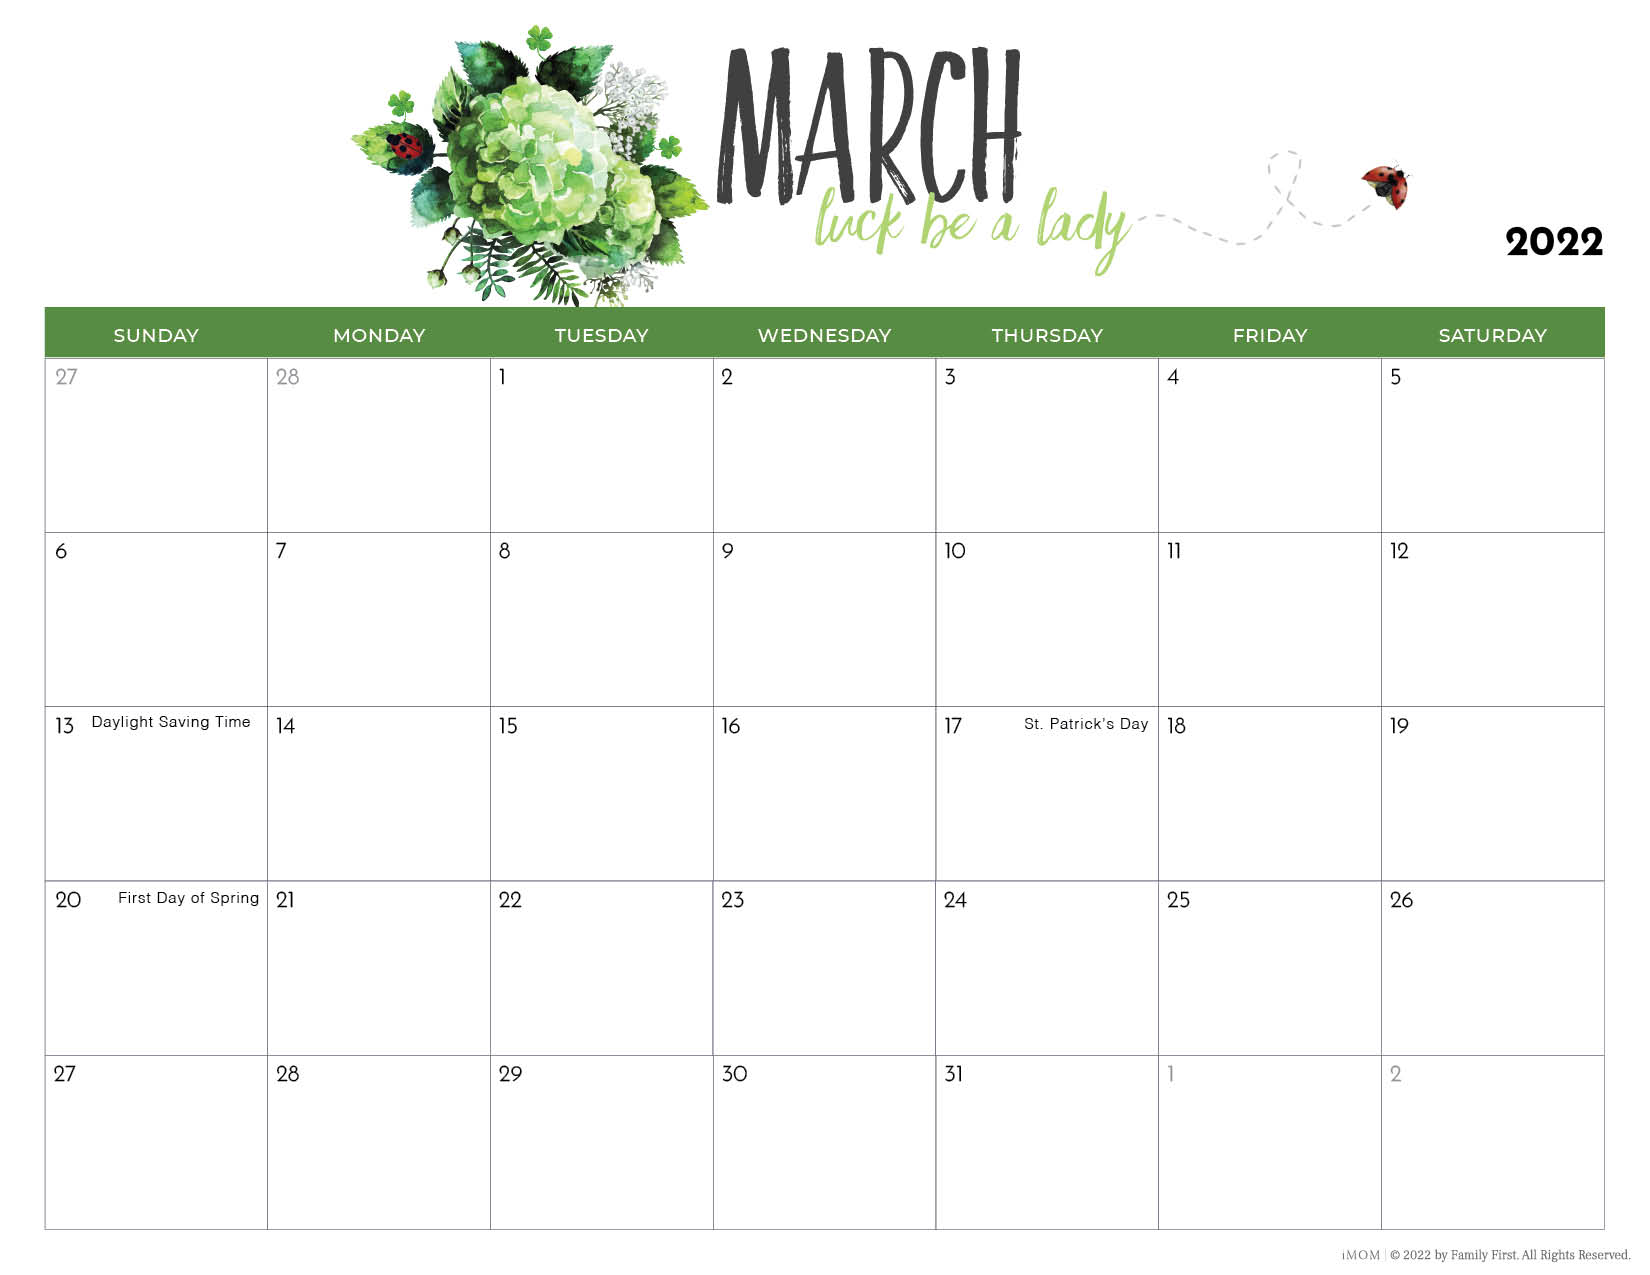 Free 2022 Monthly Calendar Template 2022 Printable Calendars For Moms - Imom